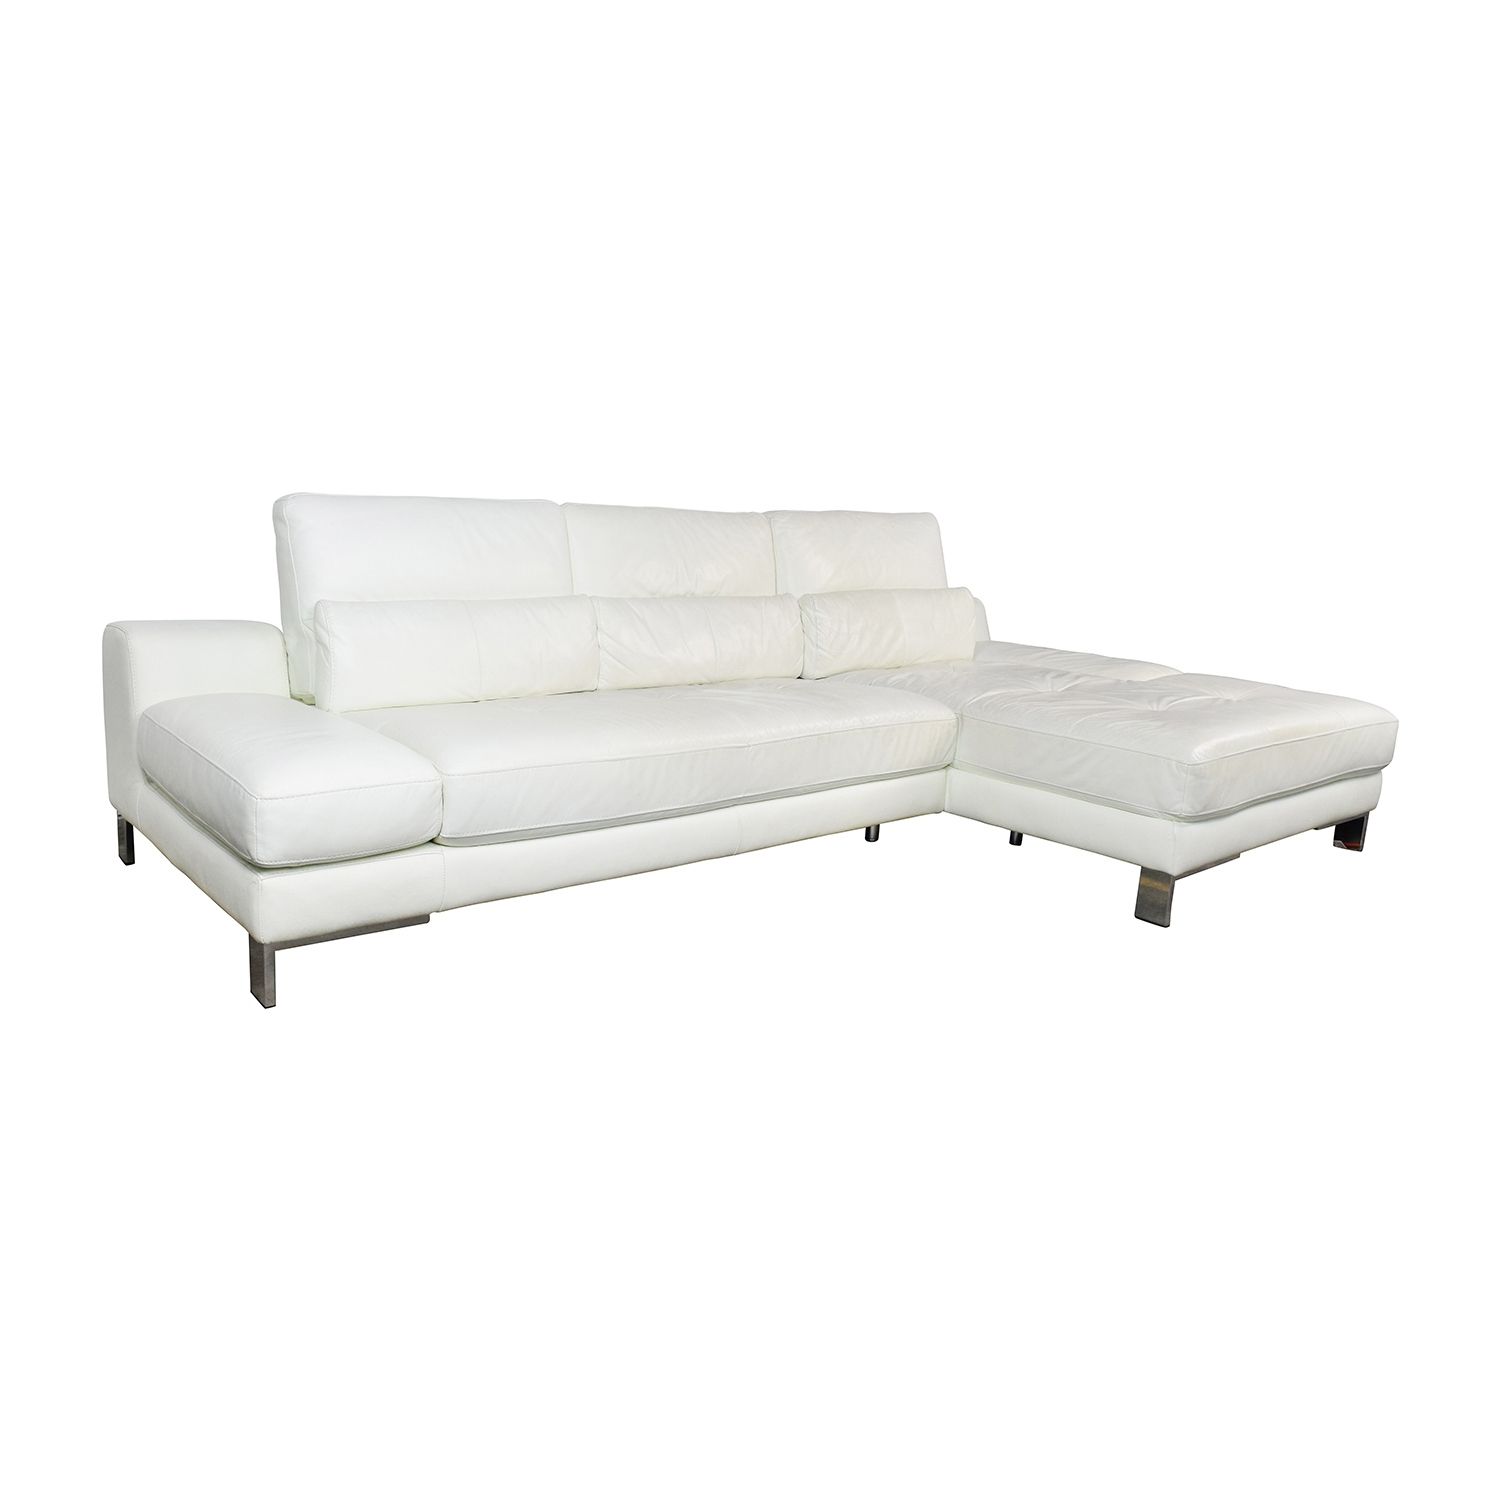 72% Off – Mobilia Canada Mobilia Canada Funktion White Leather Intended For Mobilia Sectional Sofas (View 4 of 10)